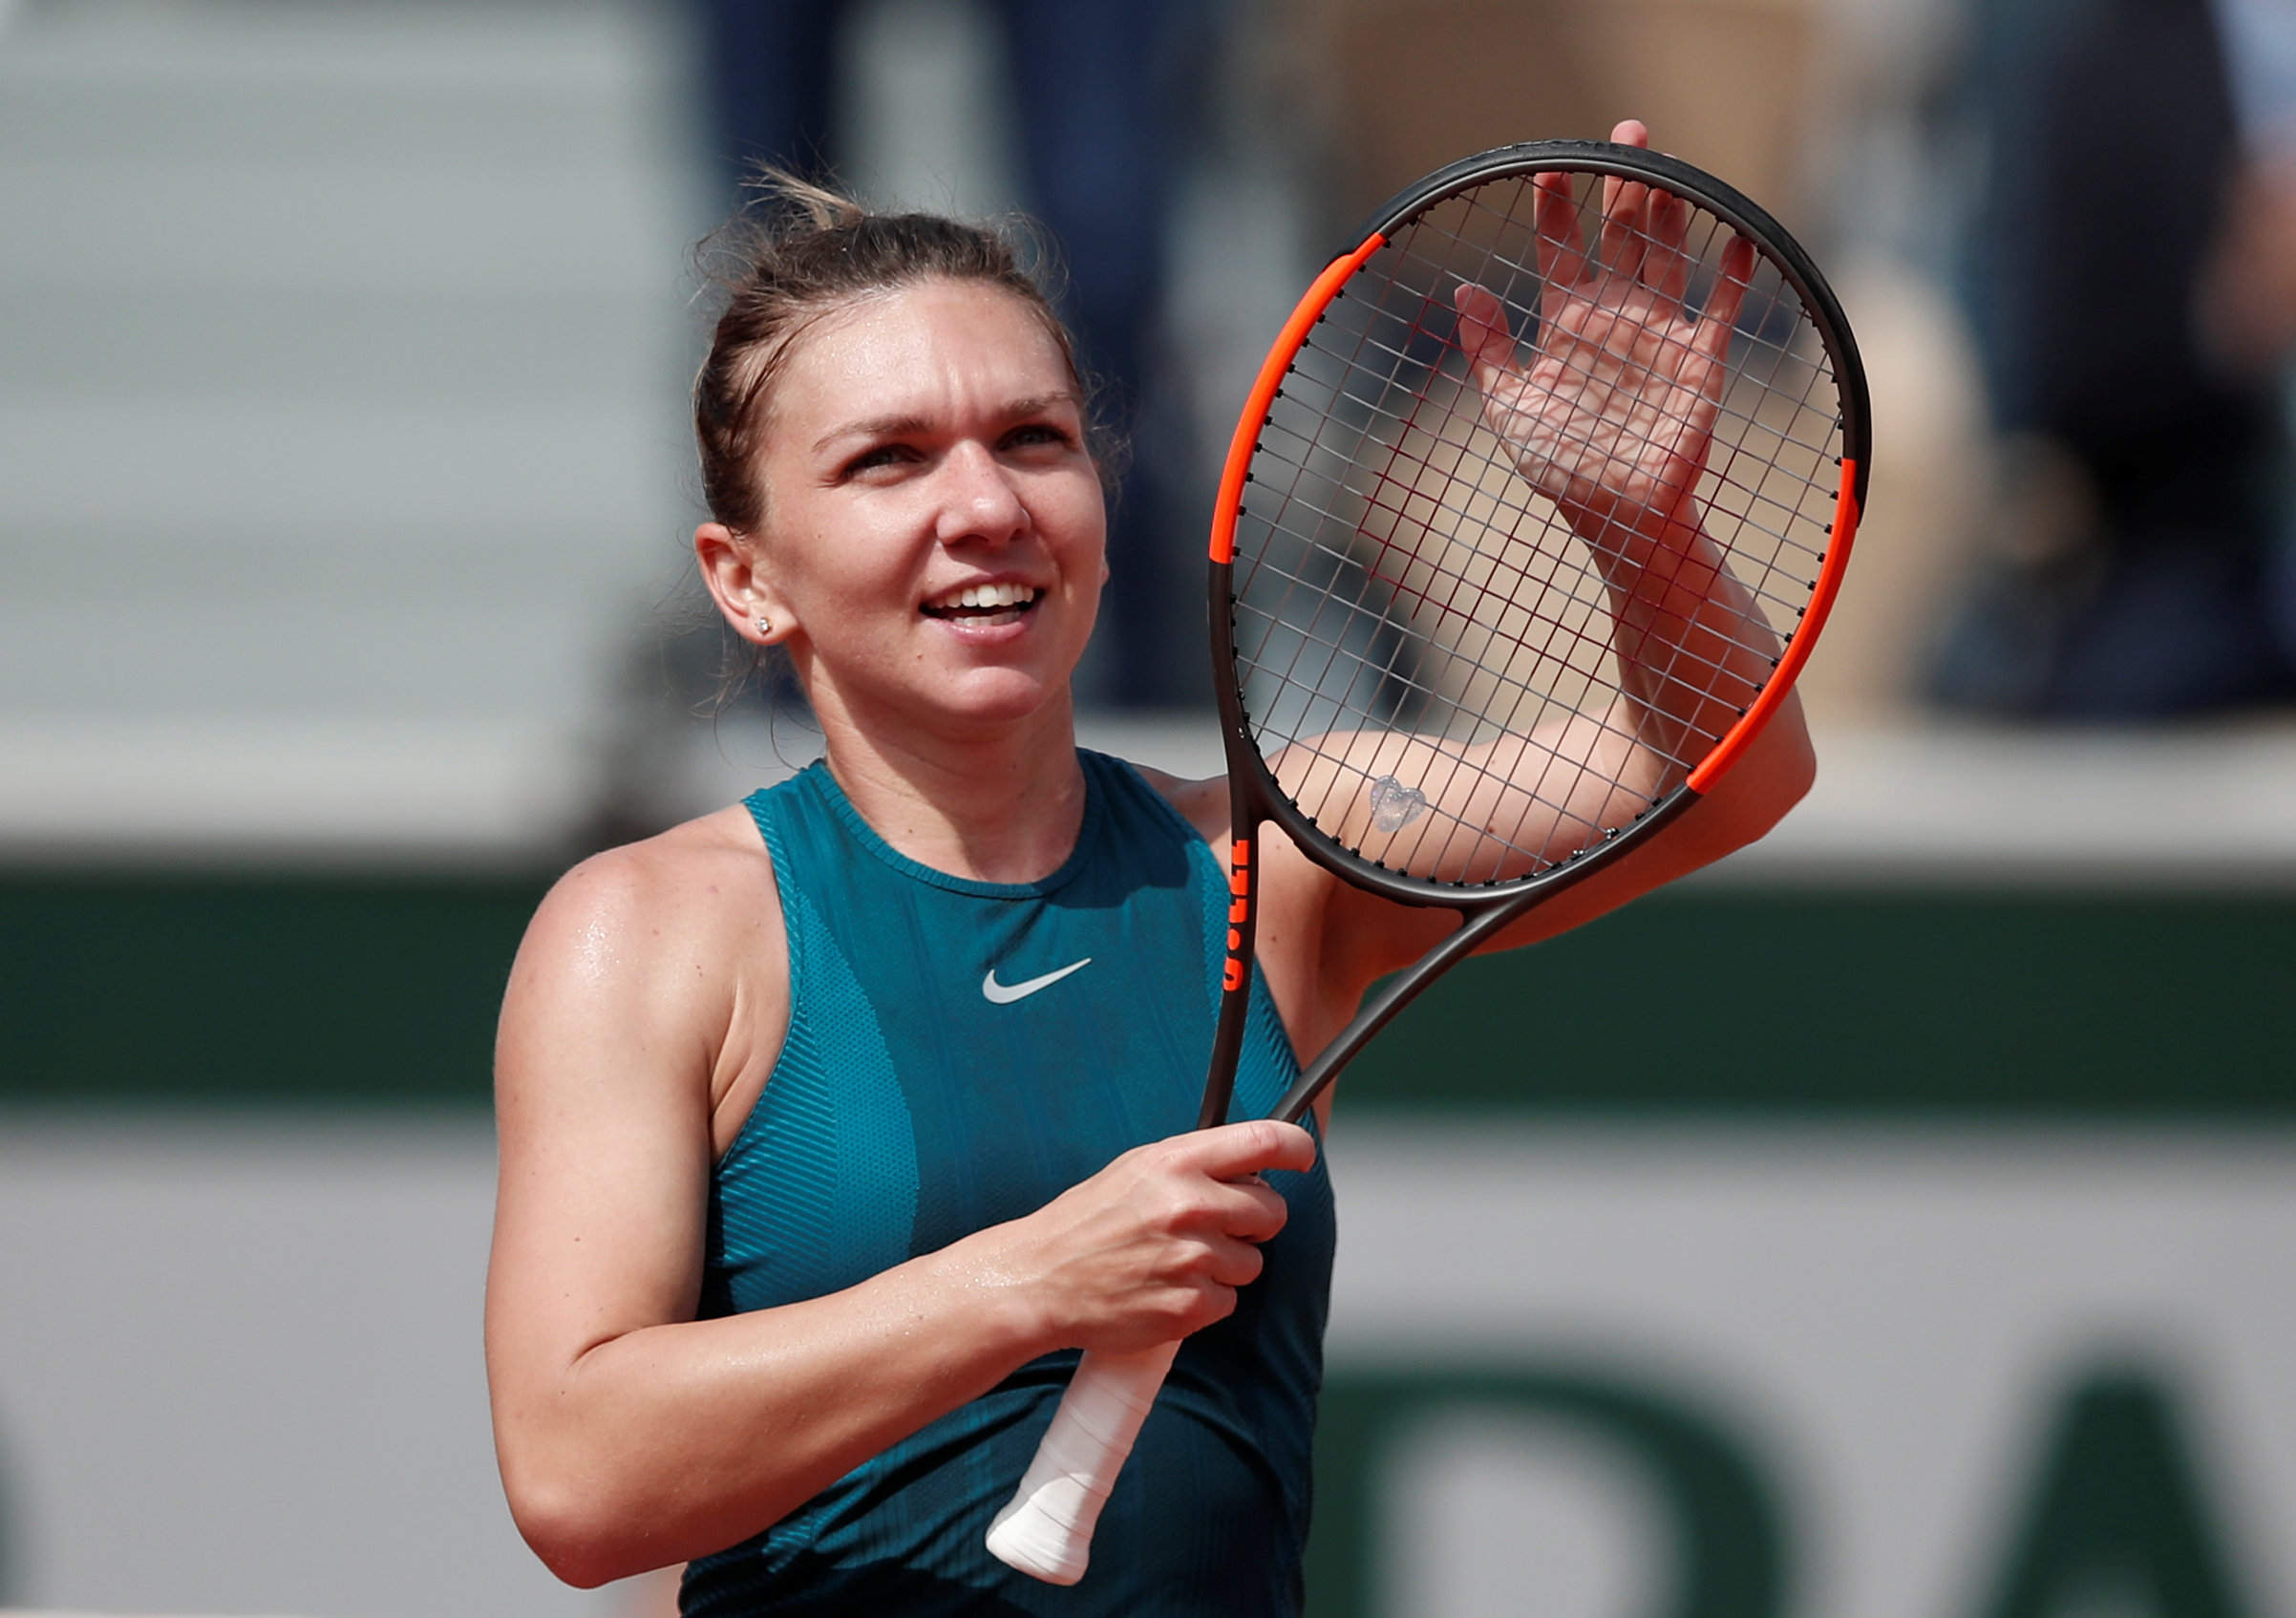 Halep overpowers Kerber to enter semis